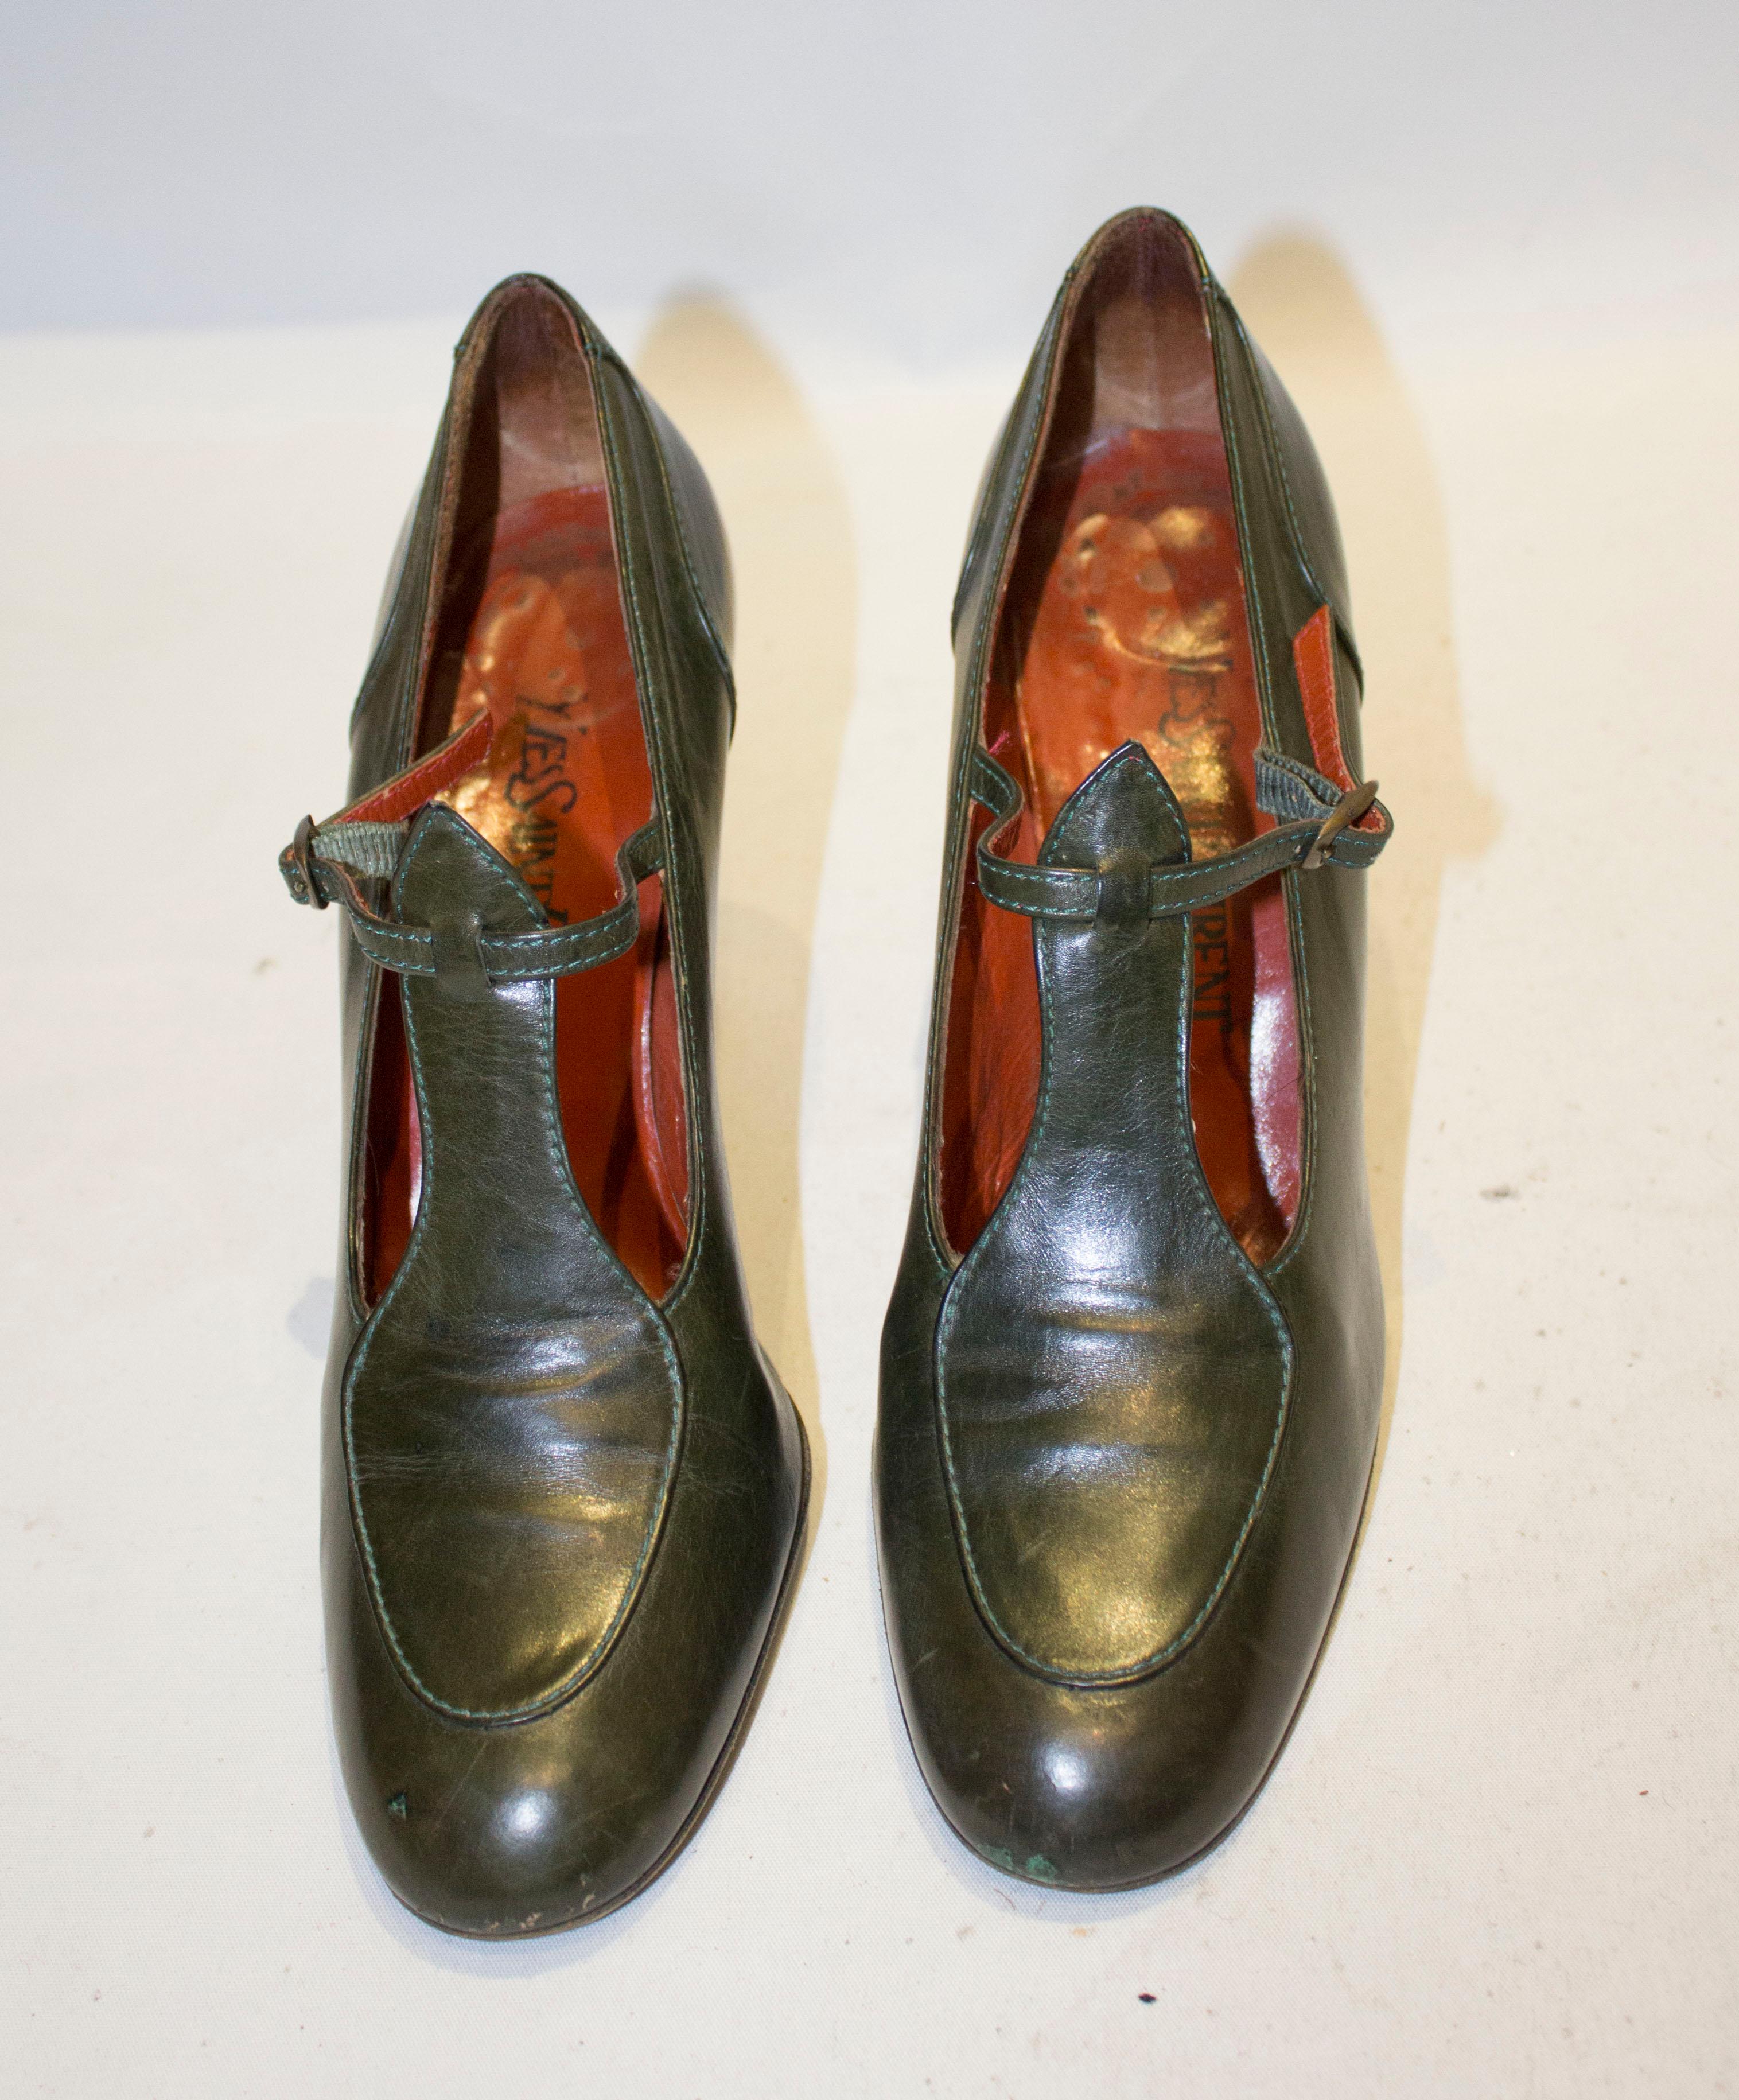 A lovely pair of vintage leather shoes by Yves Saint Laurent Paris. In an olive green colour the shoes have a 4'' heel, and are style 7521M, size US8.